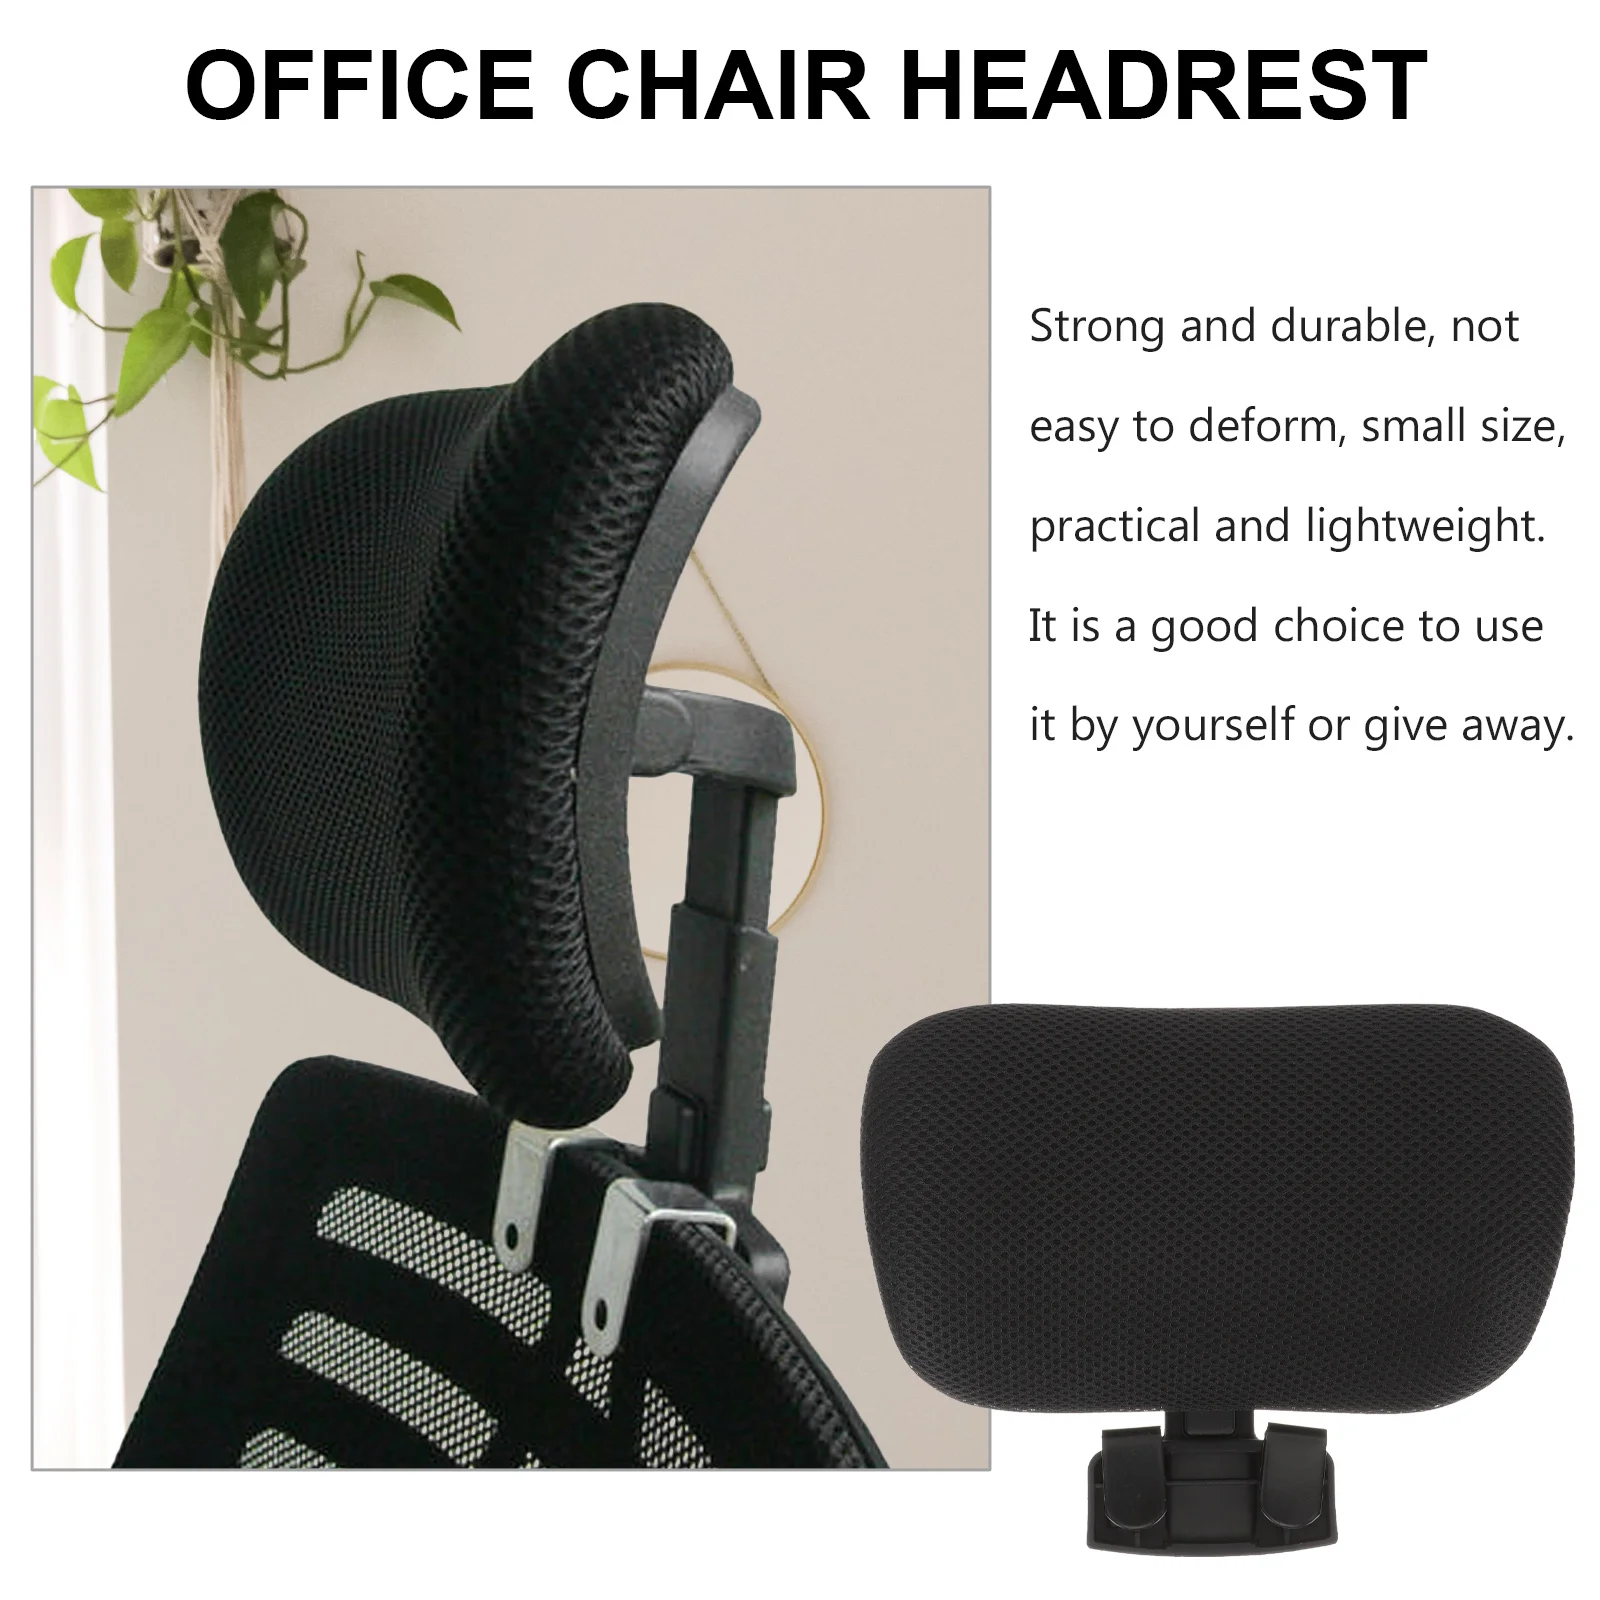 https://ae01.alicdn.com/kf/Sd82da29b2a9a43ad94ba7ce0f9cc1ae5E/Gaming-Chair-Headrest-Attachment-Comfort-Pillow-Office-Chair-Head-Support-Adjustable-Pillows-No-Punching-Computer-Head.jpg